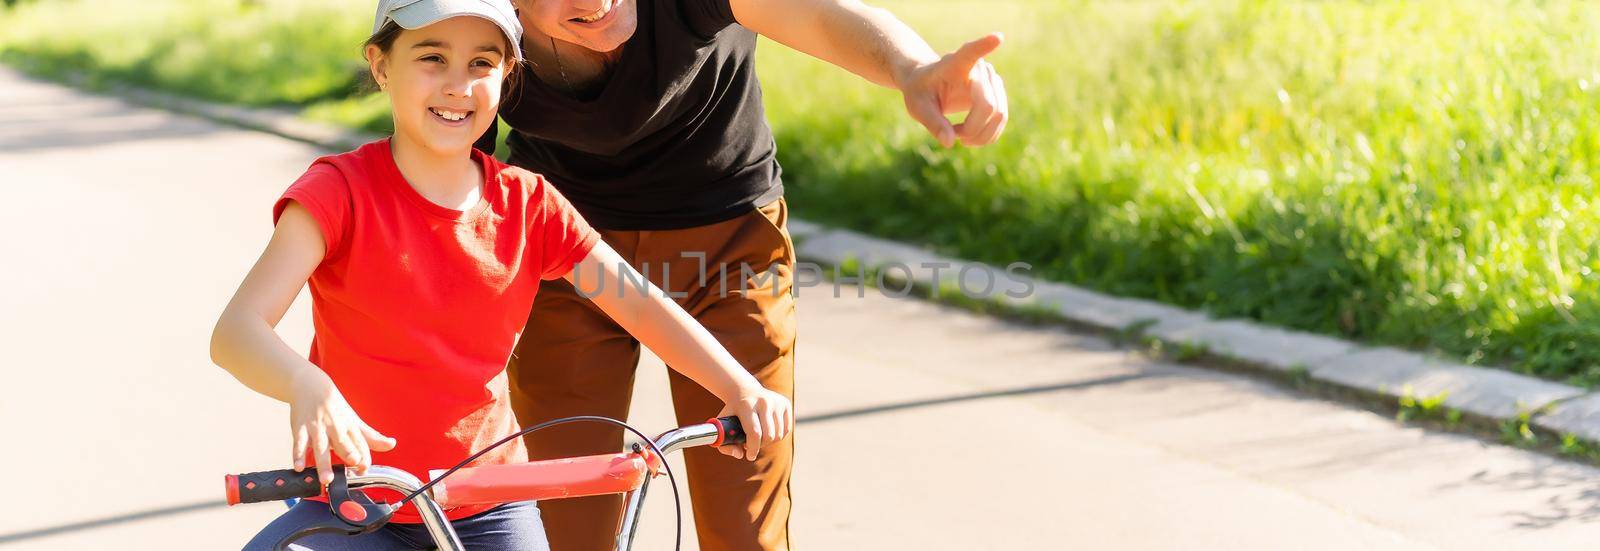 Girl learning to ride bike.